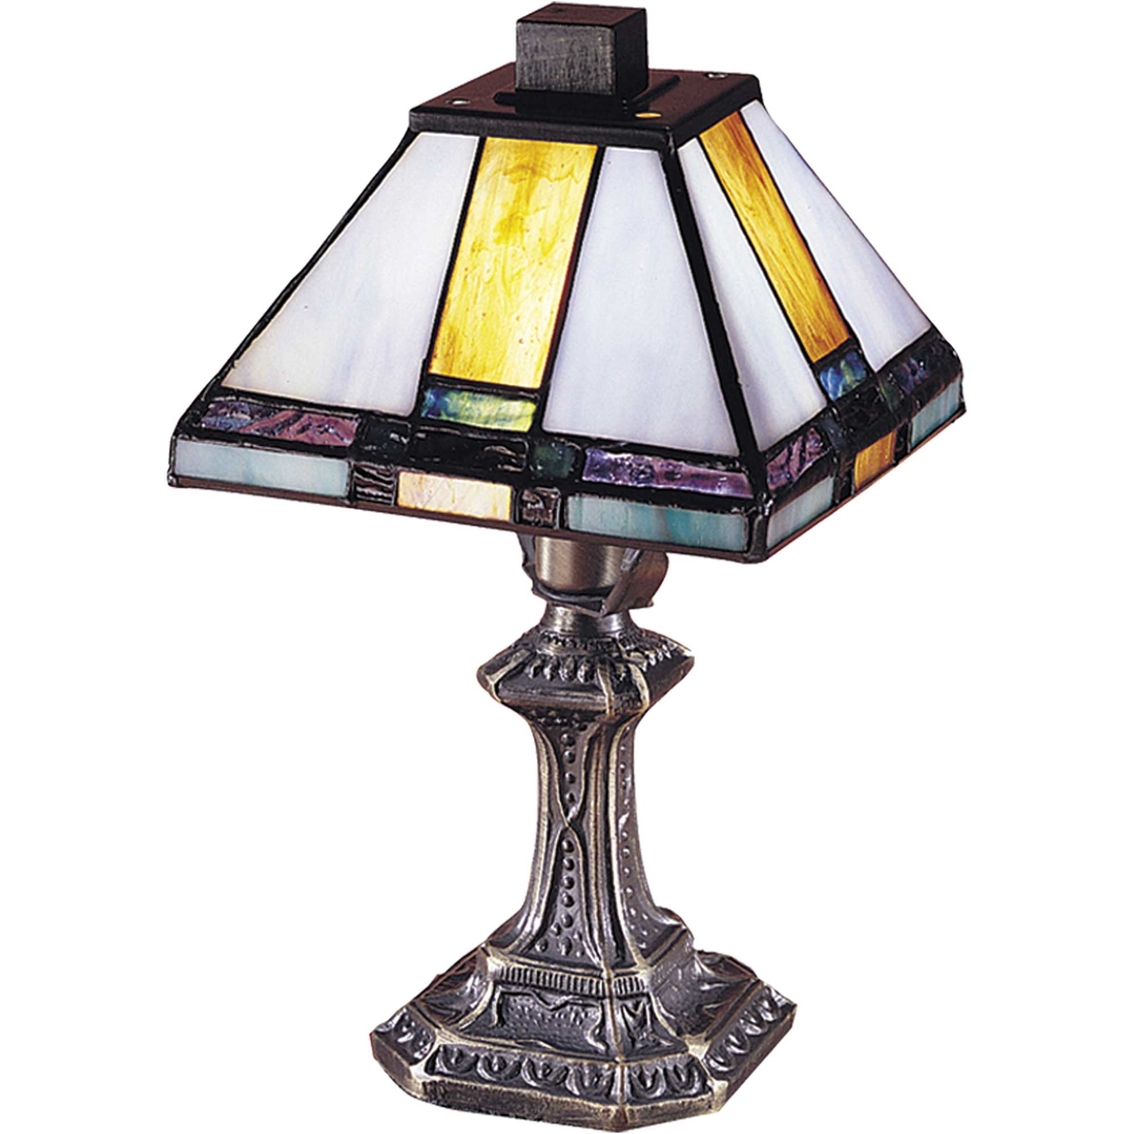 Dale Tiffany Tranquility Mission 11 in. Accent Lamp - Image 1 of 2